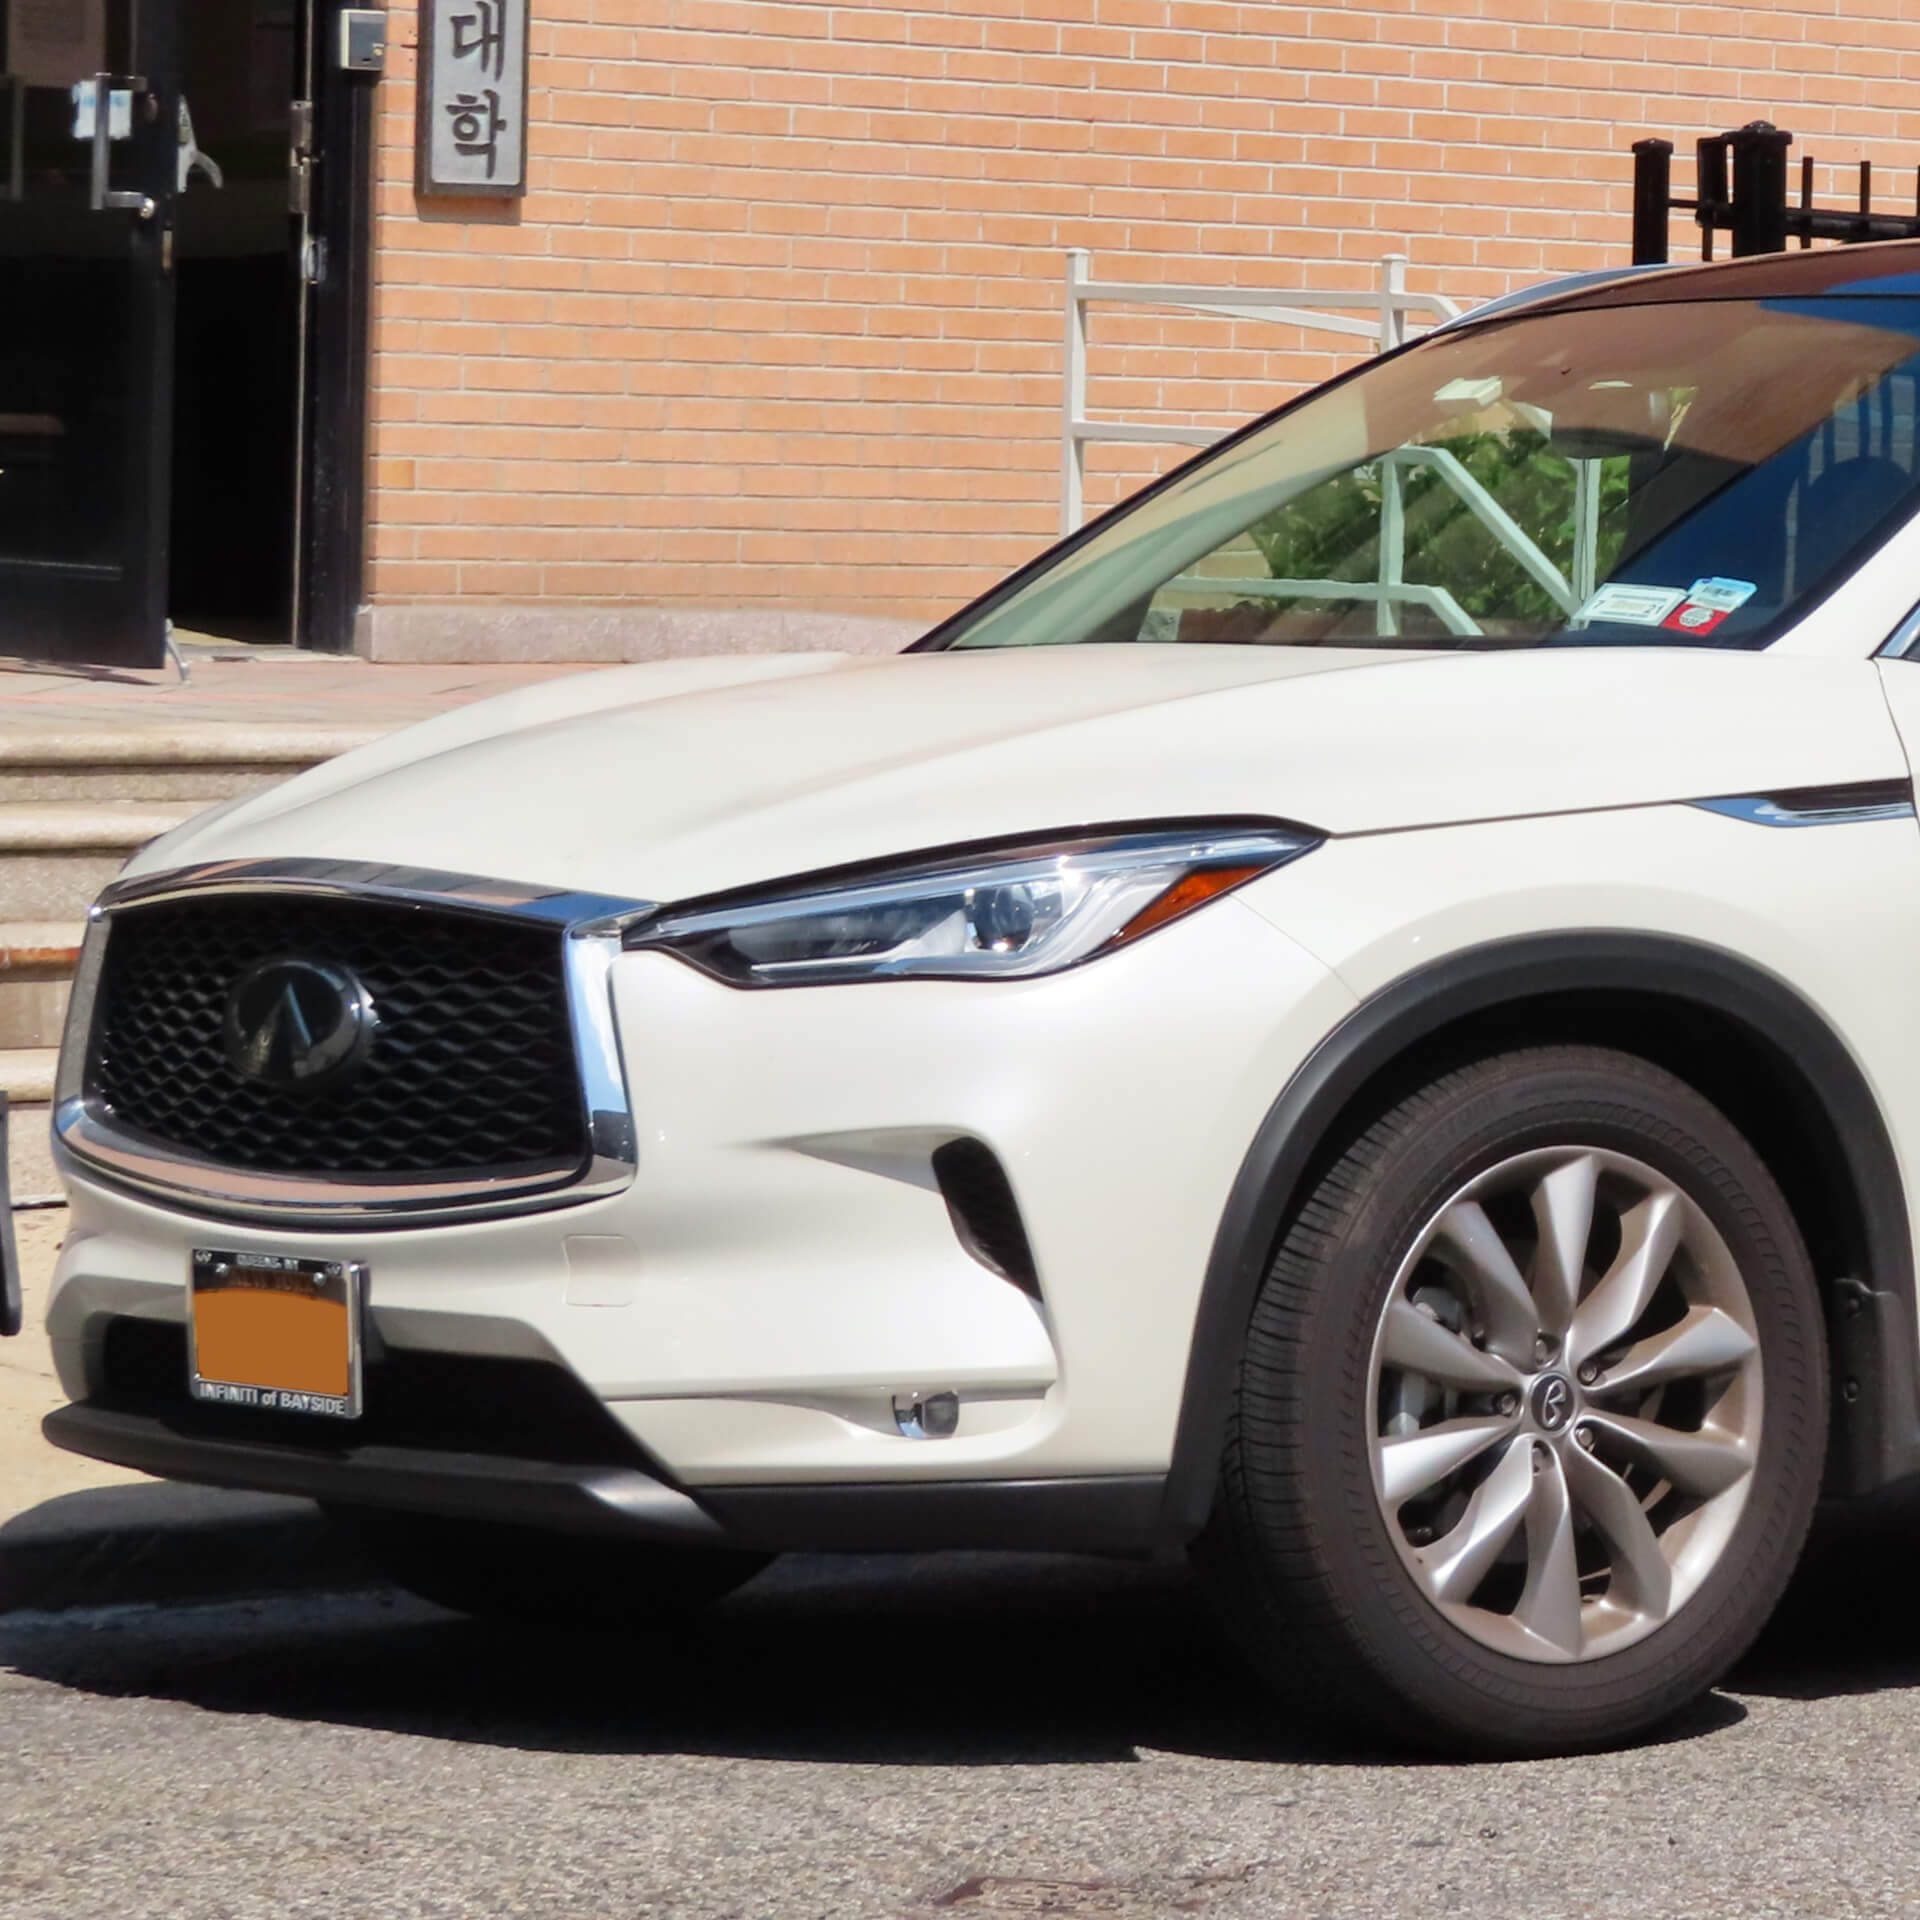 Direct4x4 accessories for Infiniti QX50 vehicles with a photo of the front of a white Infiniti QX50 parked on the street